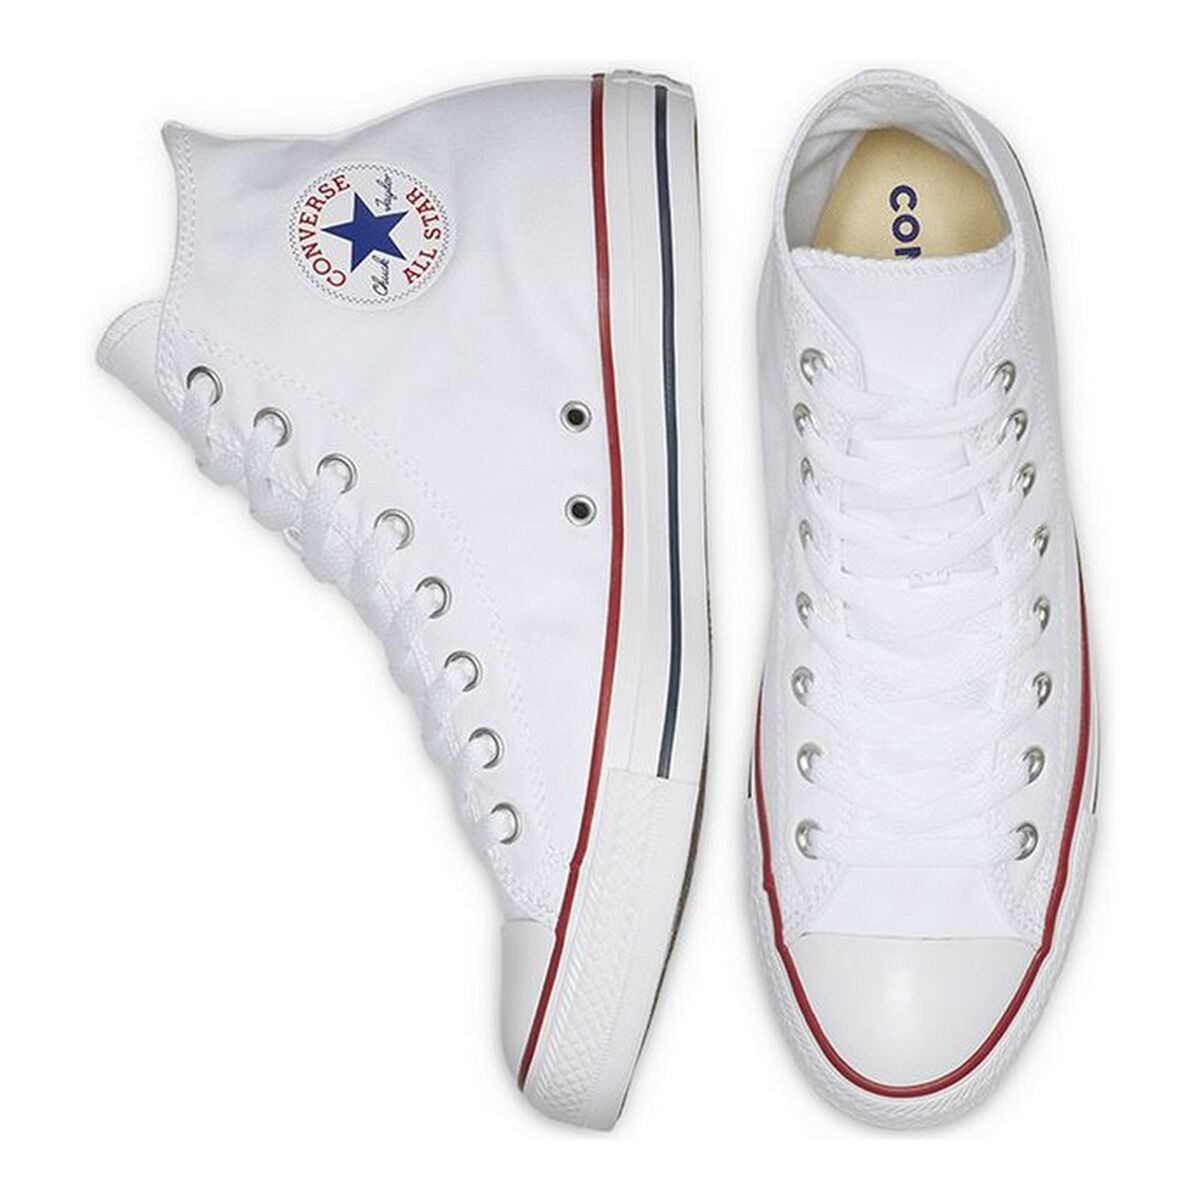 Casual Trainers Converse Chuck Taylor All Star White-Fashion | Accessories > Clothes and Shoes > Sports shoes-Converse-Urbanheer